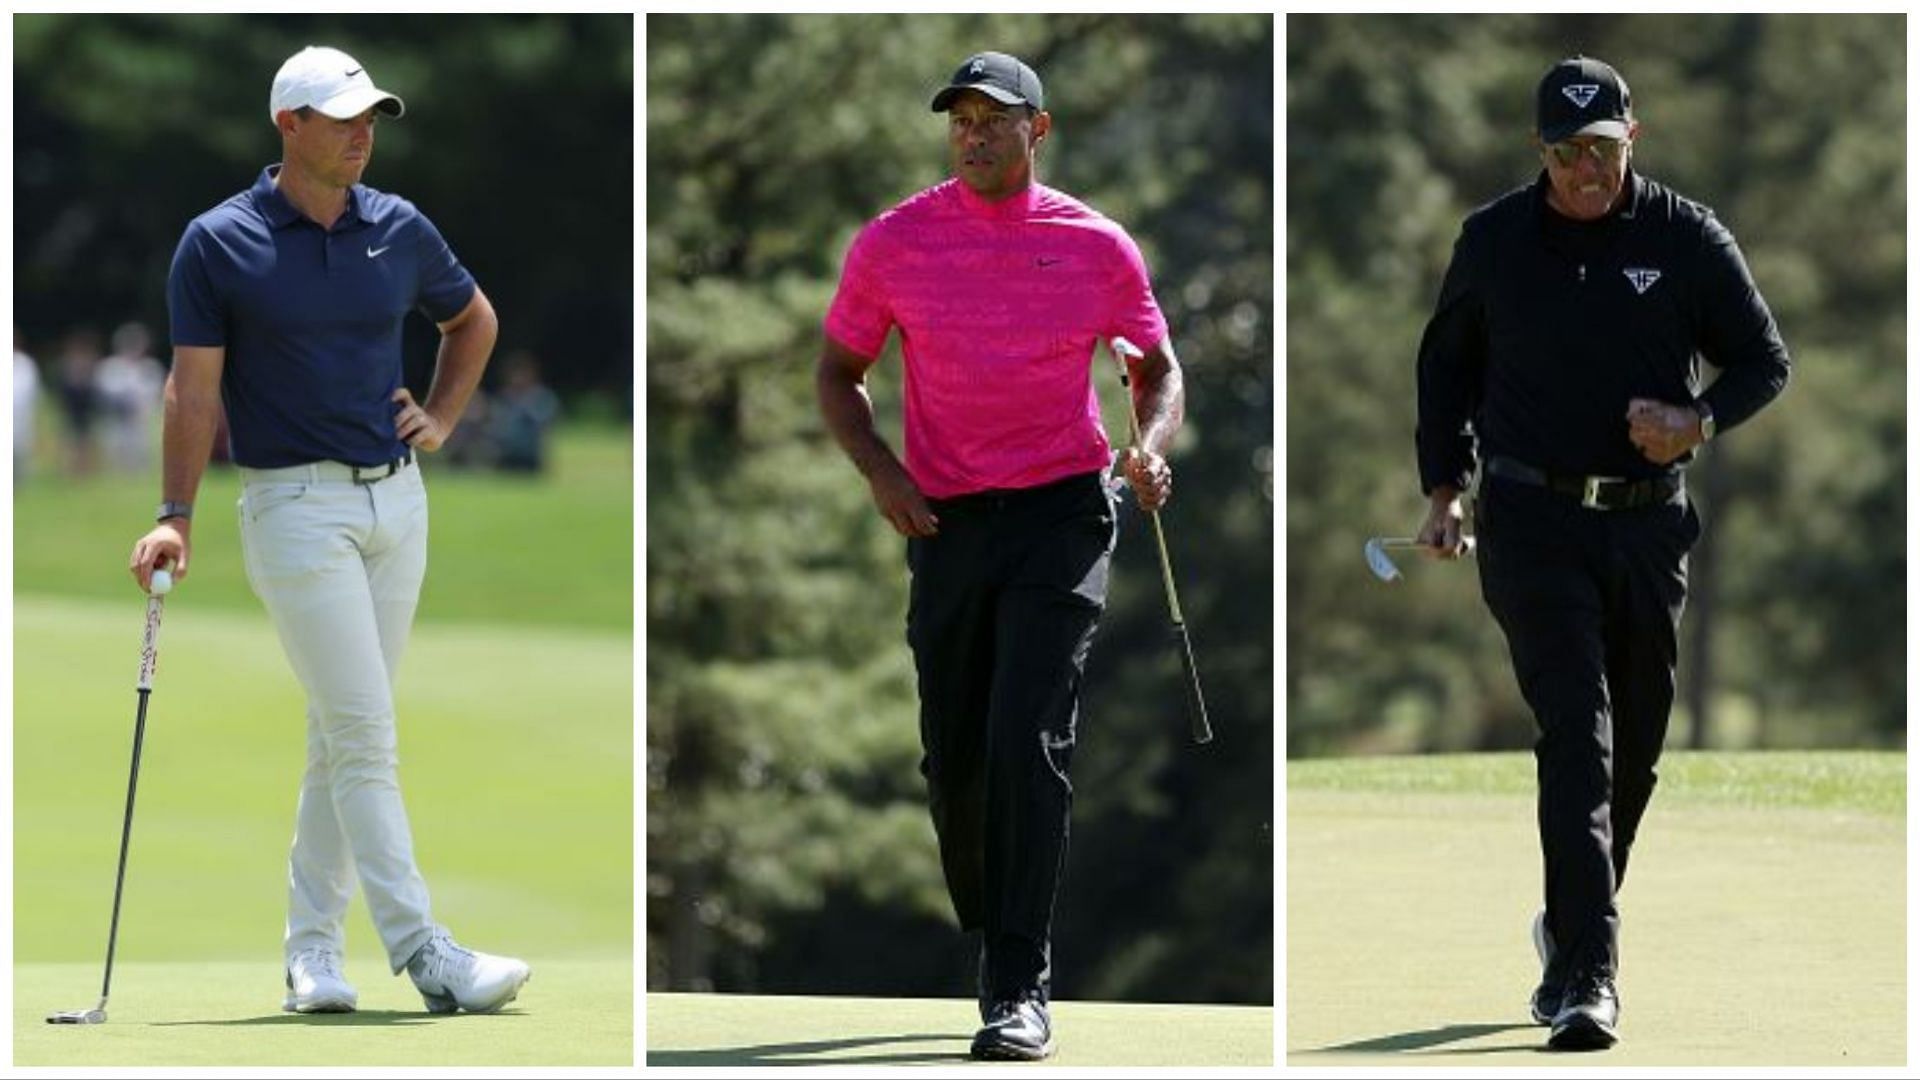 Rory McIlroy, Tiger Woods and Phil Mickelson (via Getty Images)